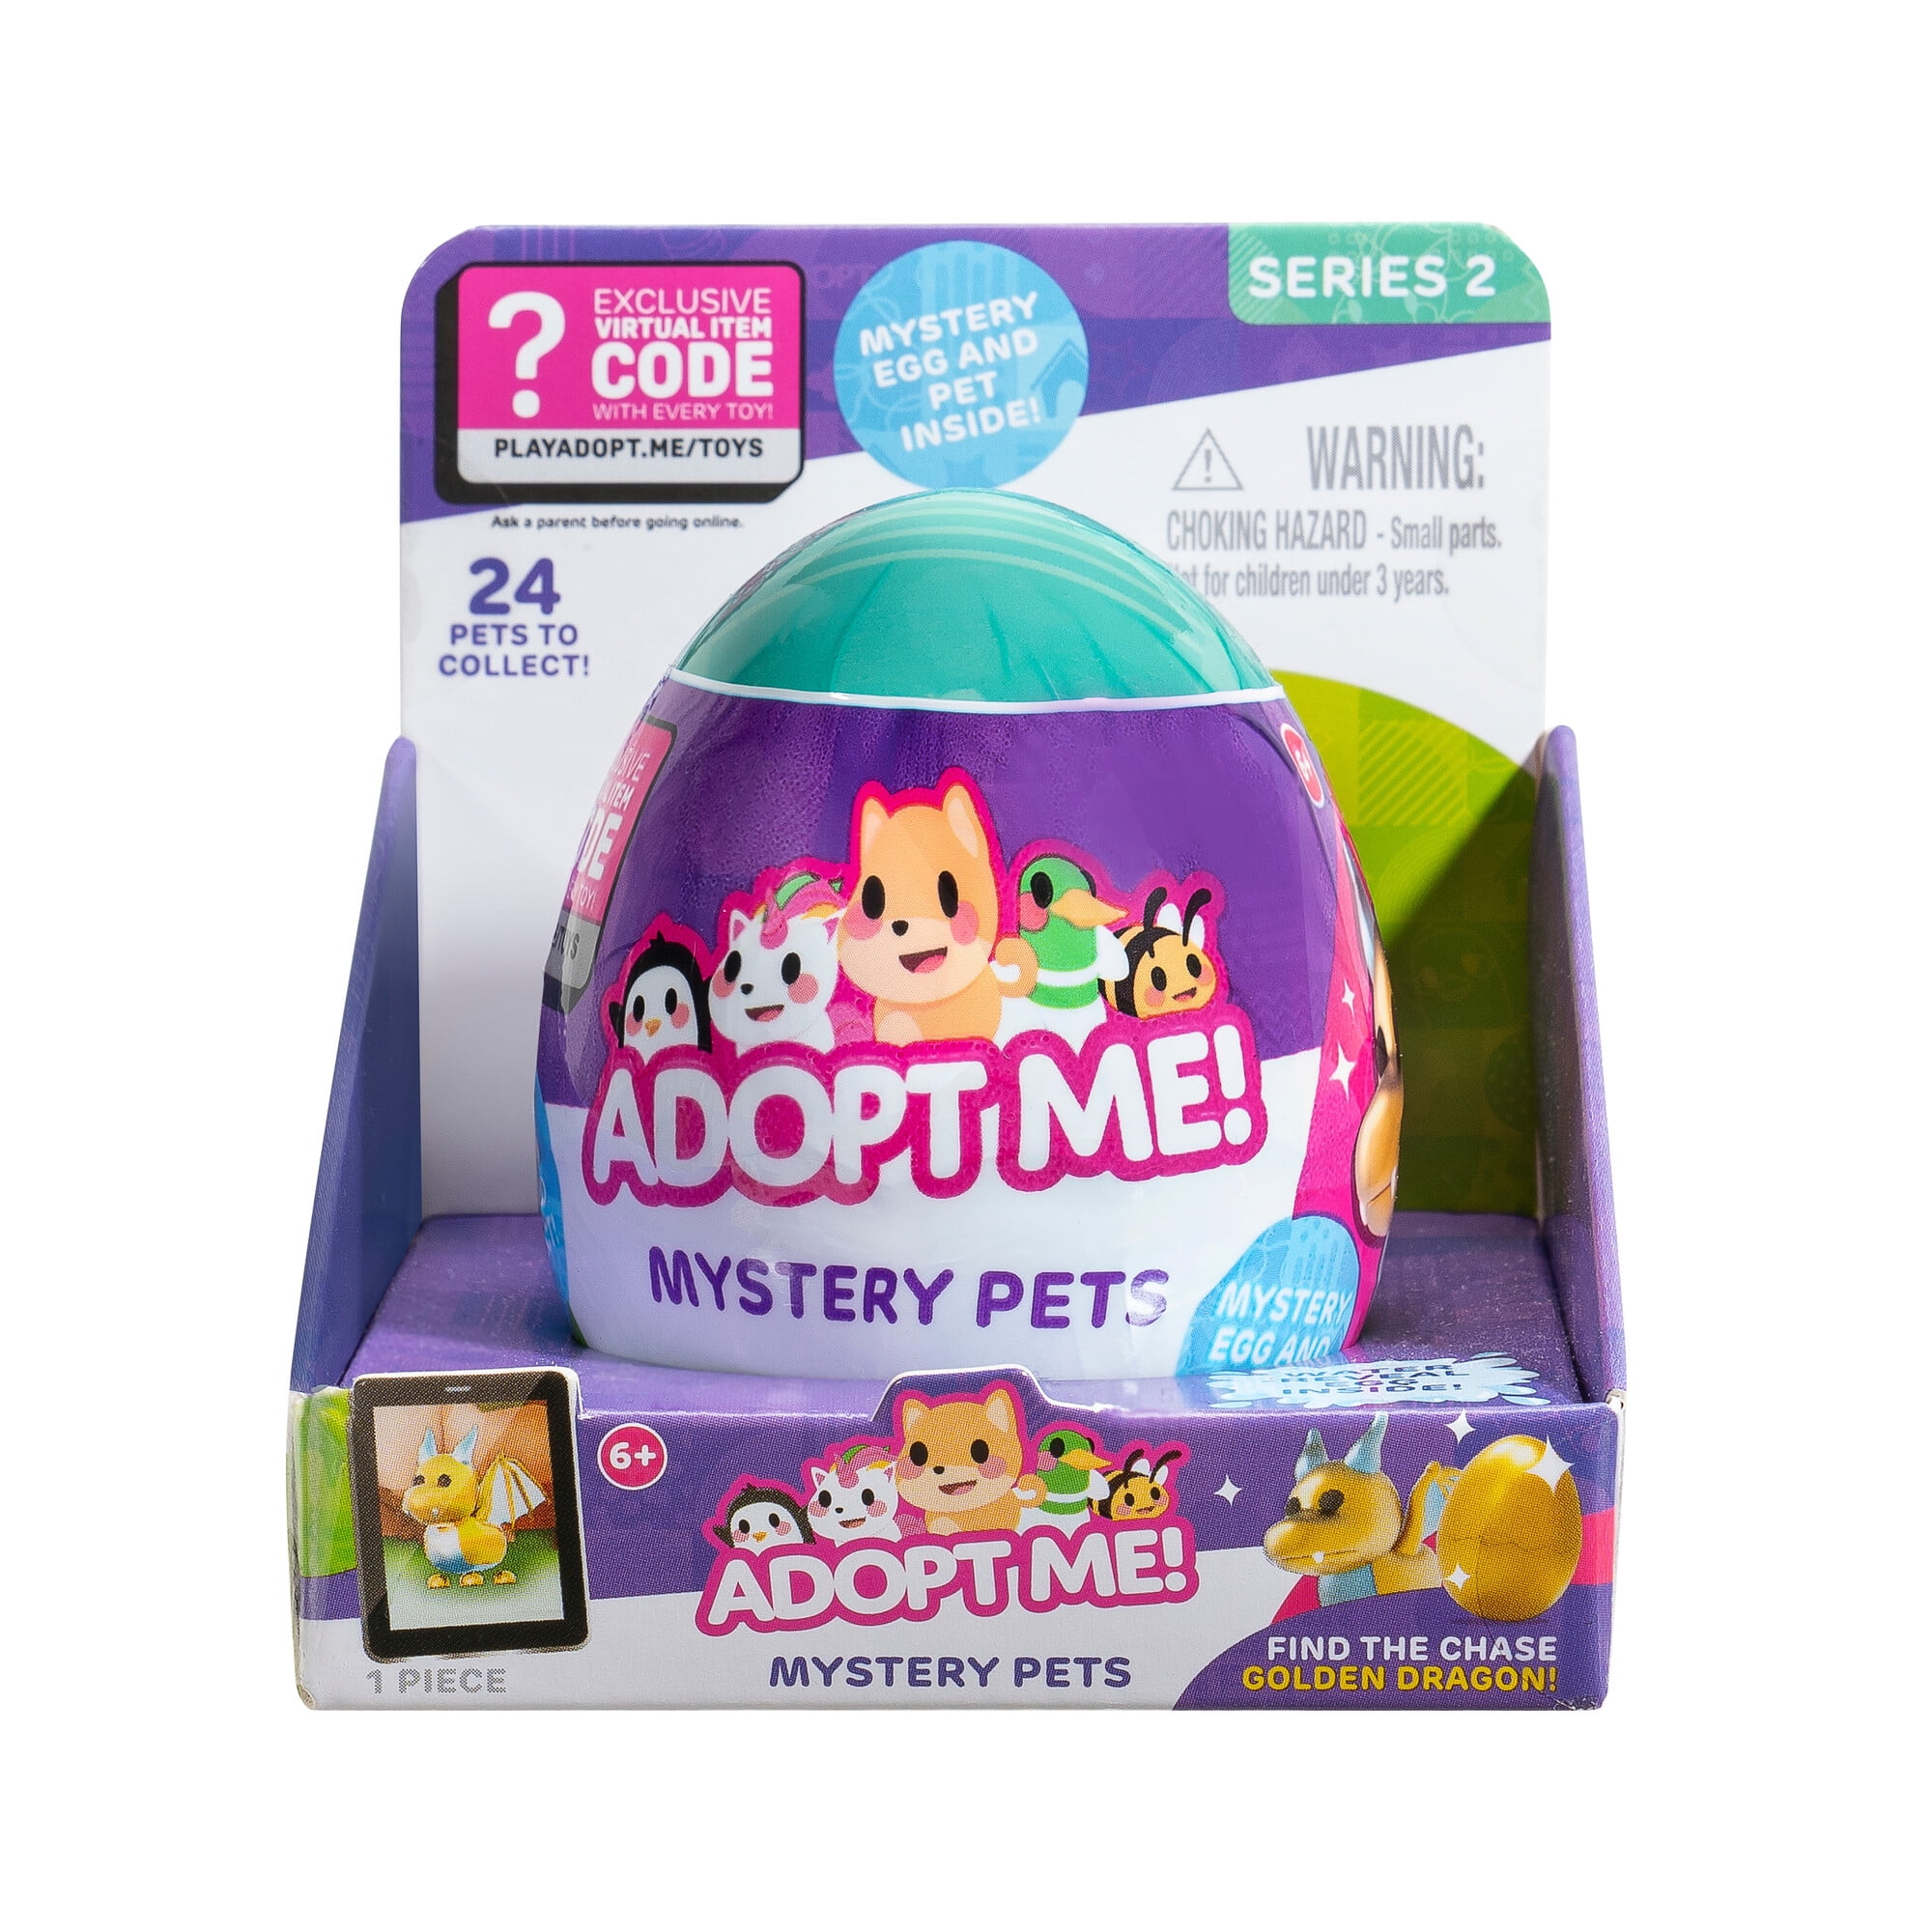 ADOPT ME! Surprise PURPLE Egg Plush Pets (Series 1) *1 Of 4 Mystery Pets &  Code*